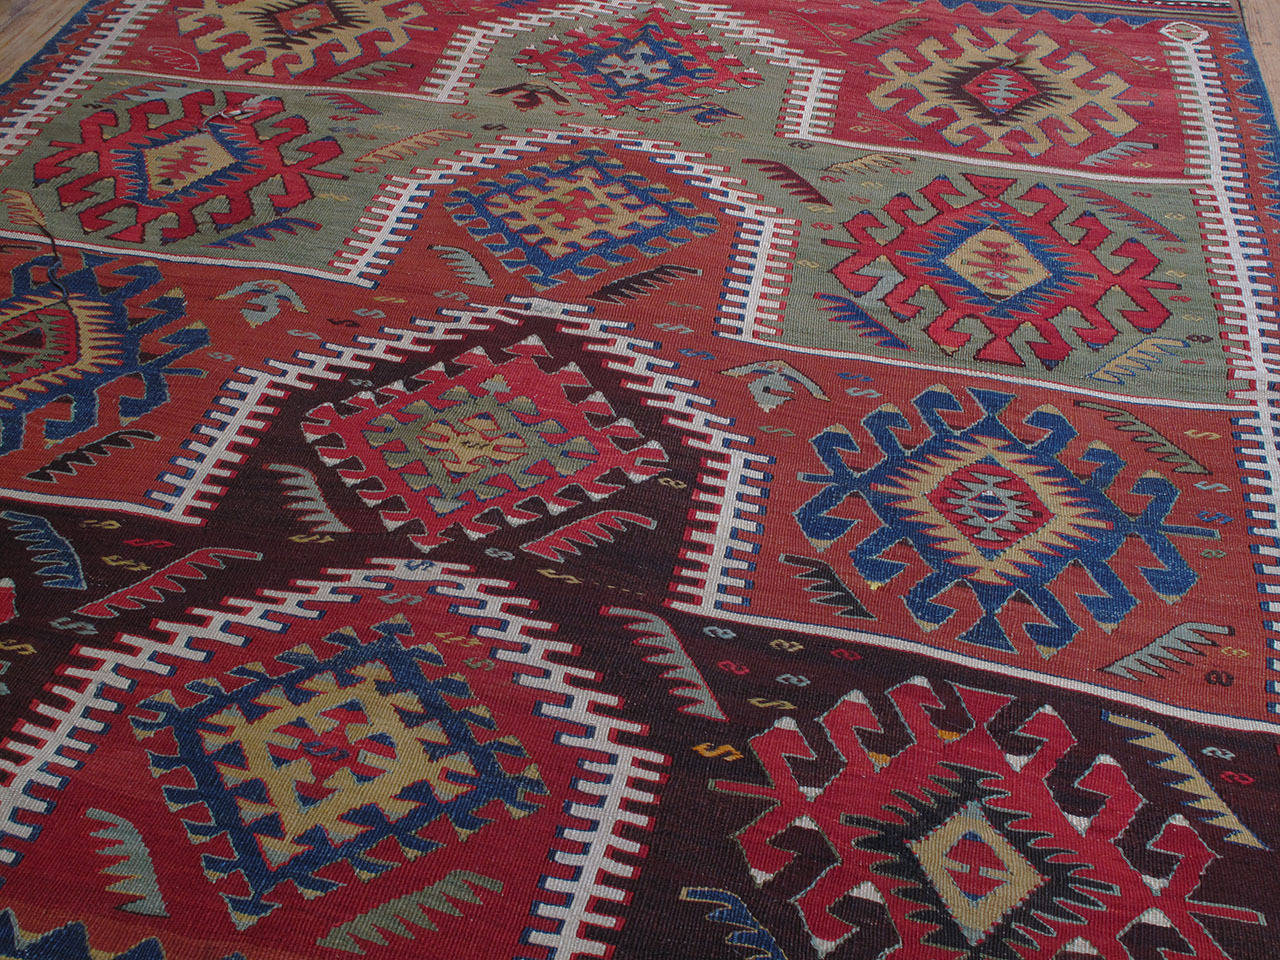 Hand-Woven Kilim Rug with Ascending Arches